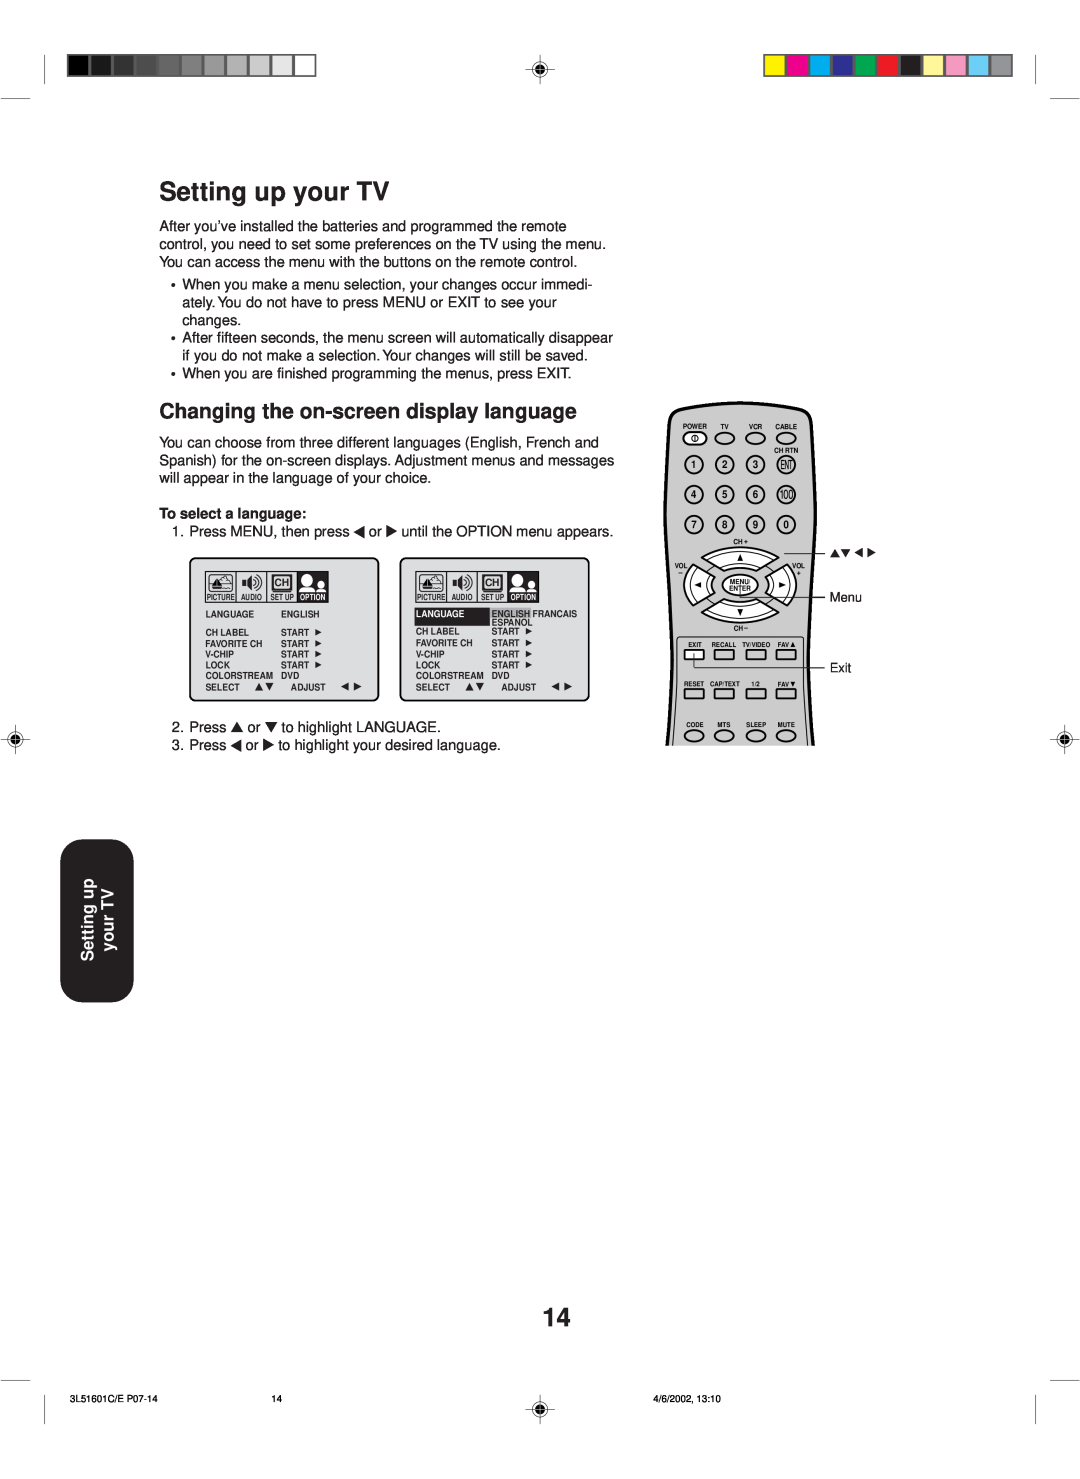 Toshiba TV 27A42 appendix Setting up your TV, Changing the on-screen display language, To select a language 